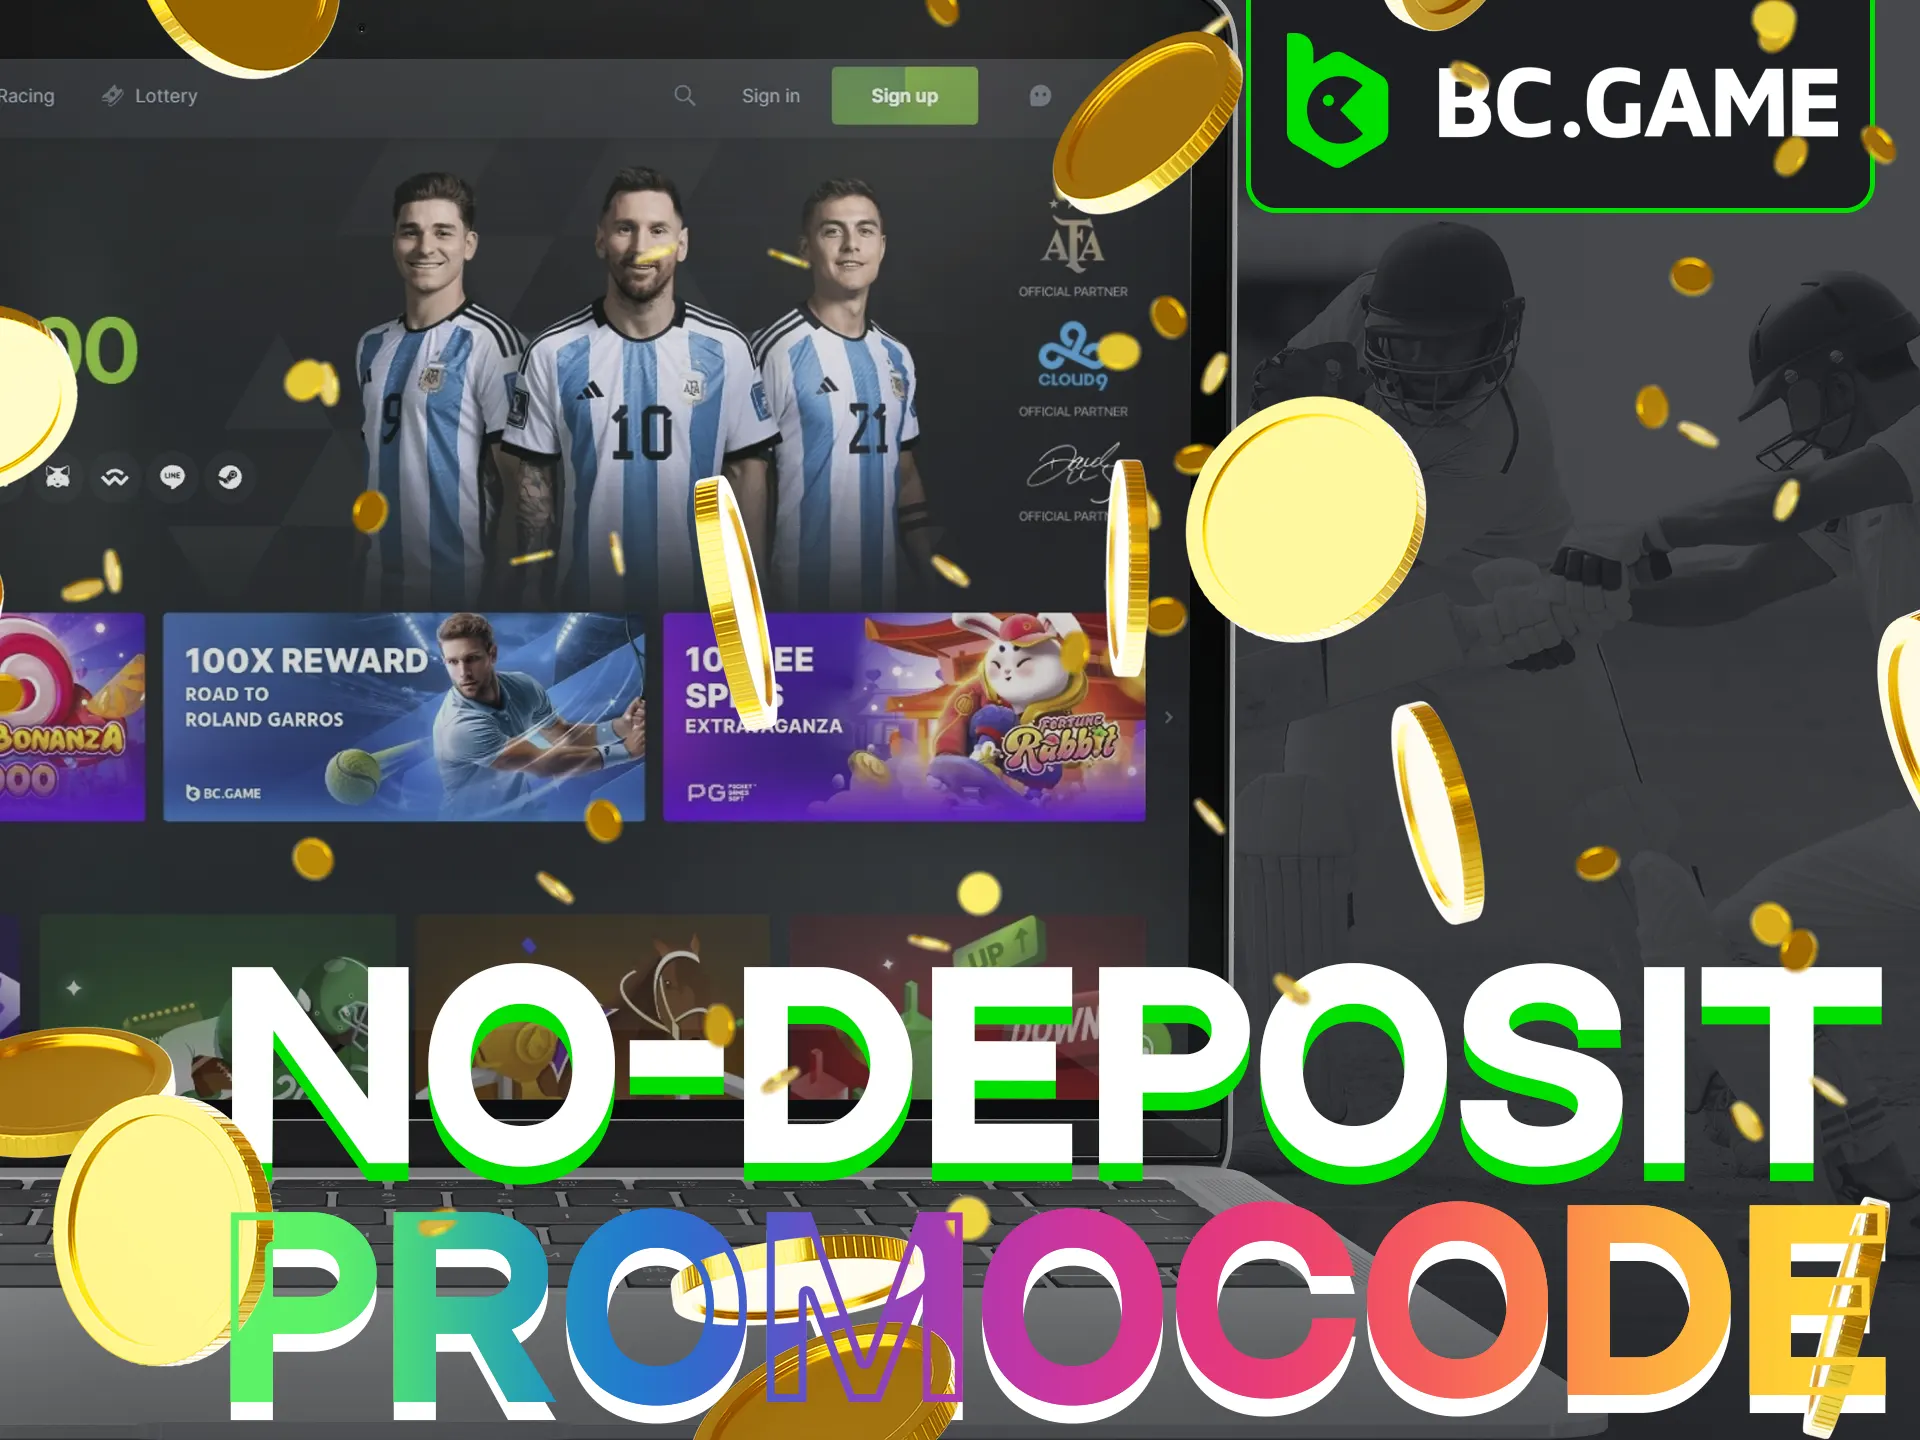 At BC Game there is no no-deposit promocode.